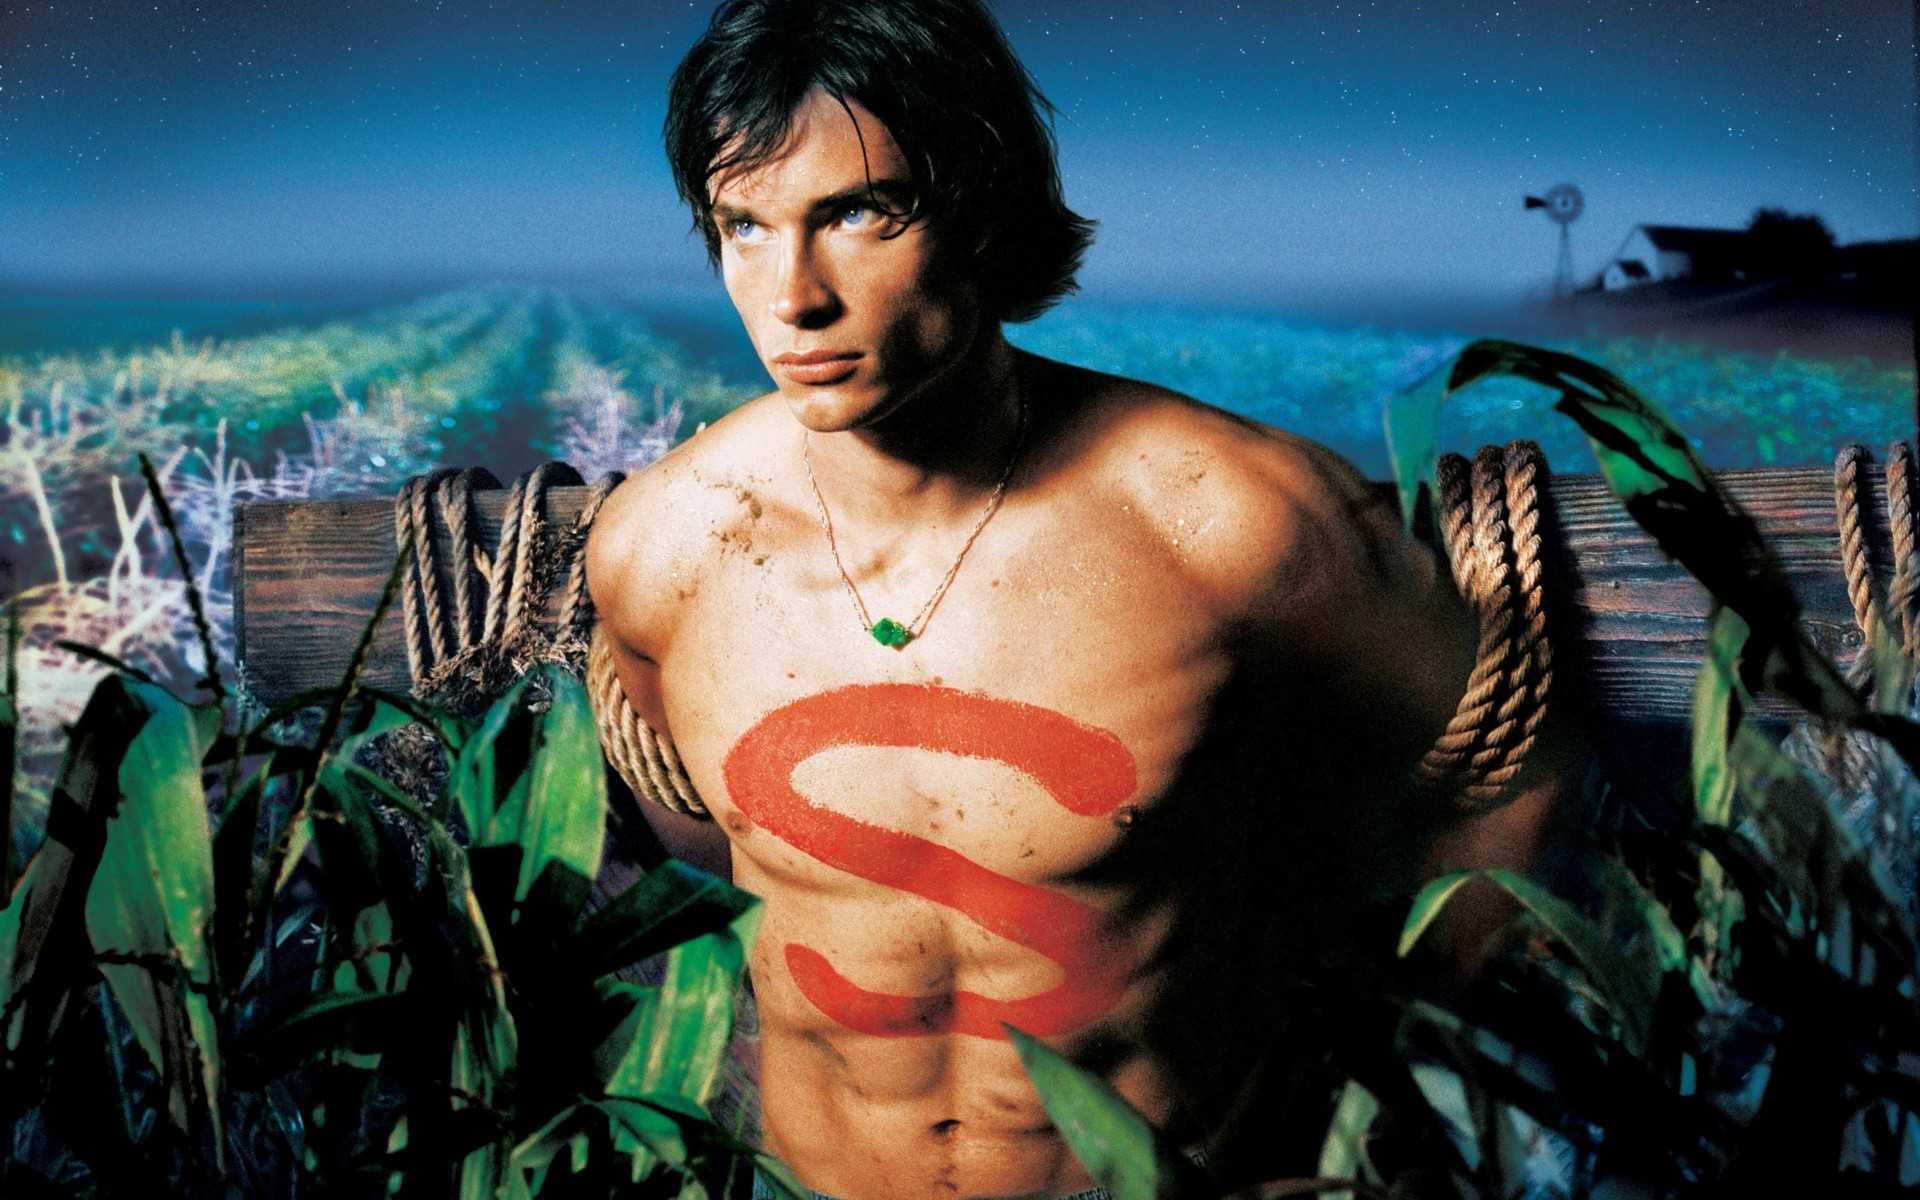 Smallville Episodes Wallpaper HD High Quality Of Pc Years Ago Made